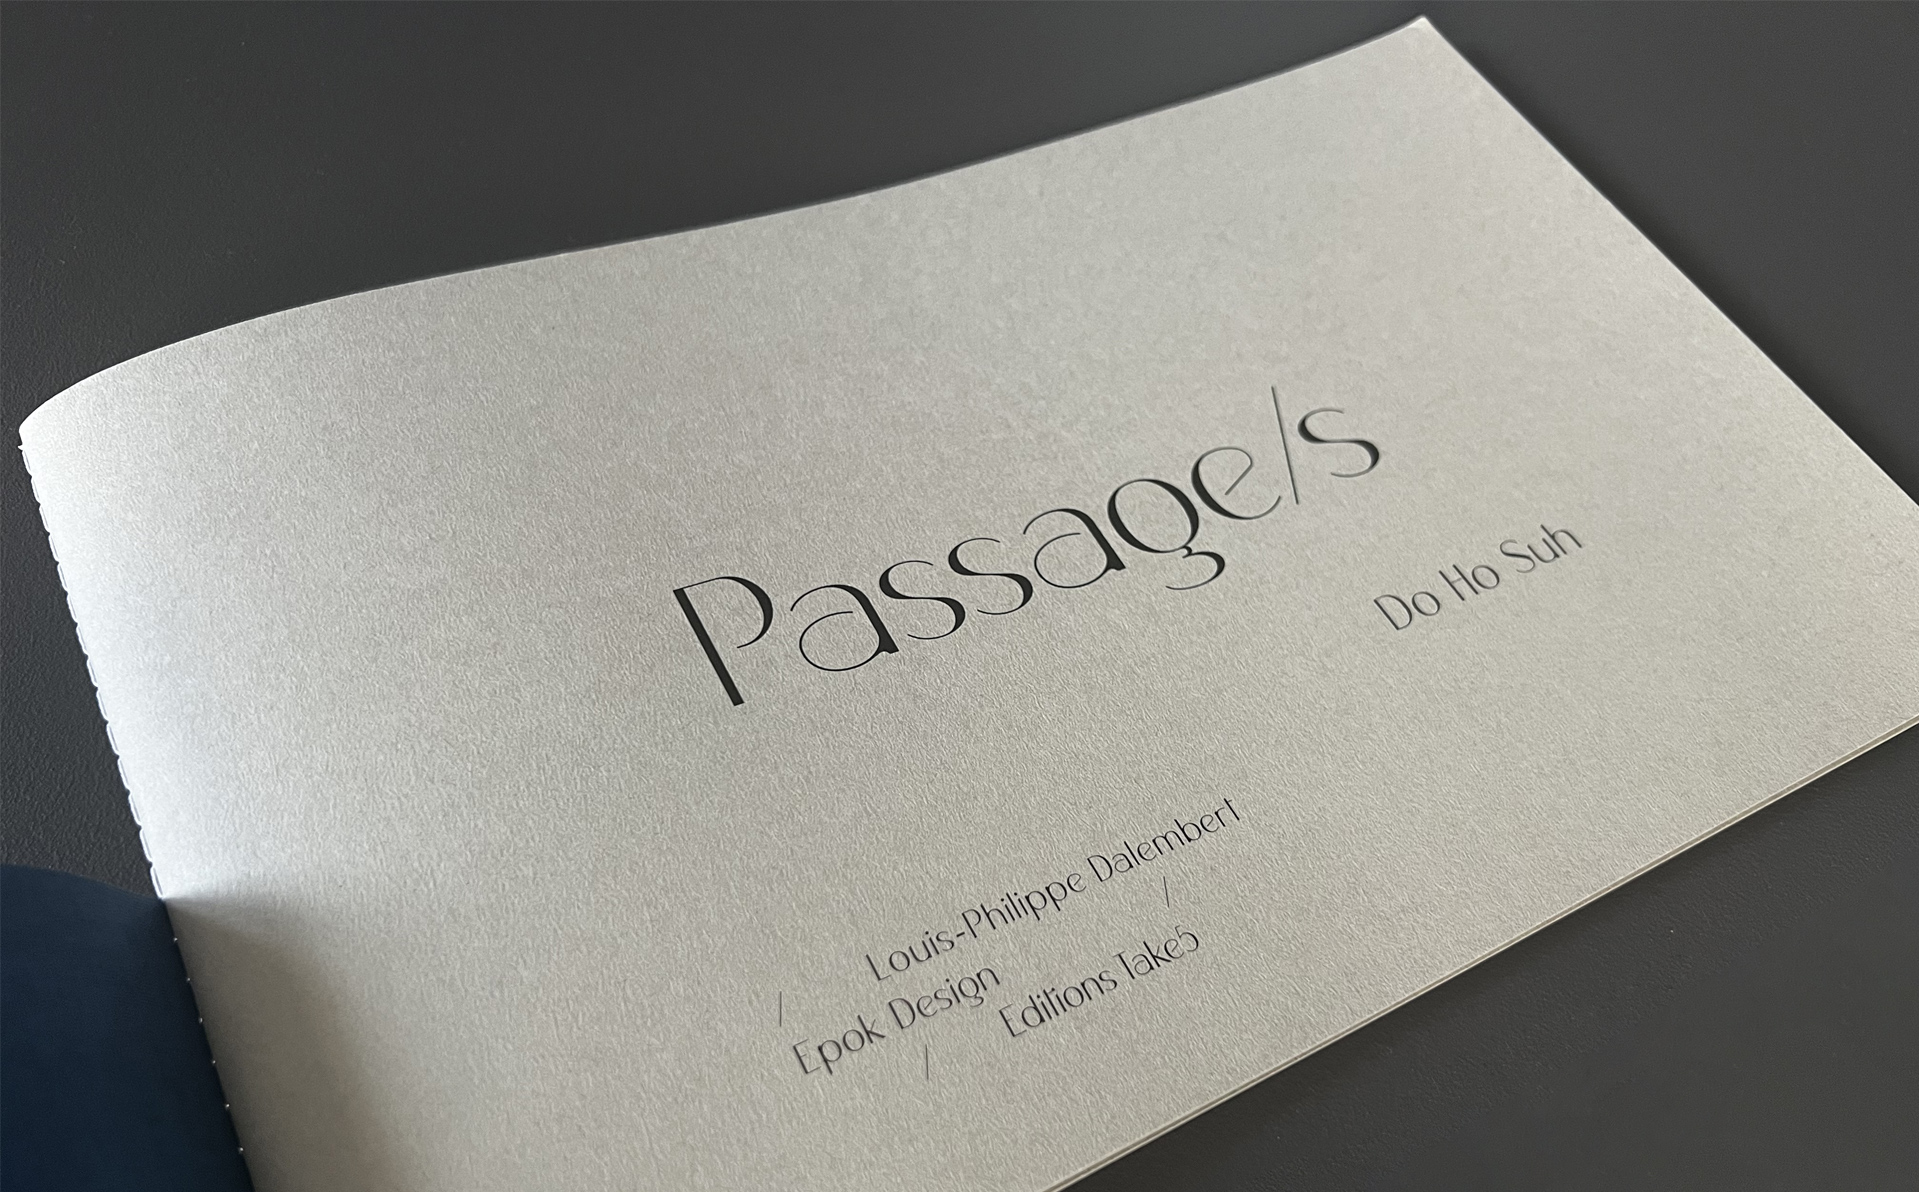 Epok-design-Passage-s-editions-Take-5-brochure-interieure-Iter-typographie-passage-s-double page-introduction ouvrage-